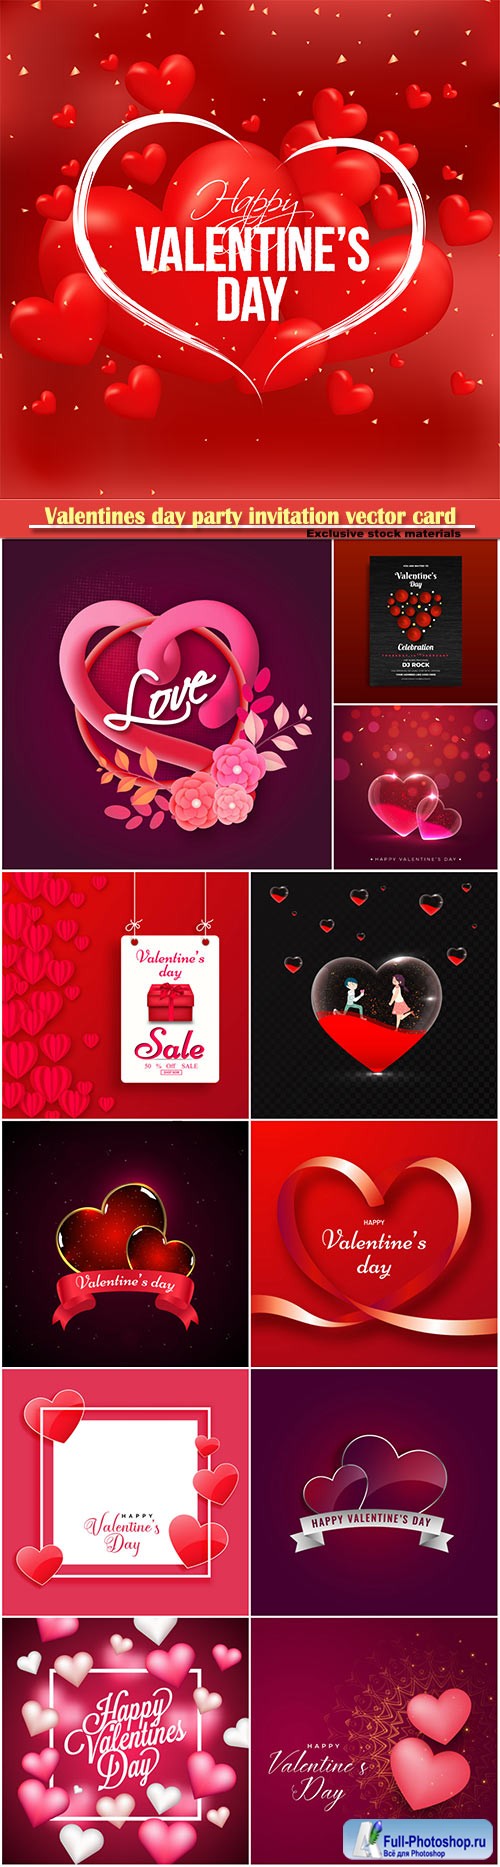 Valentines day party invitation vector card # 22